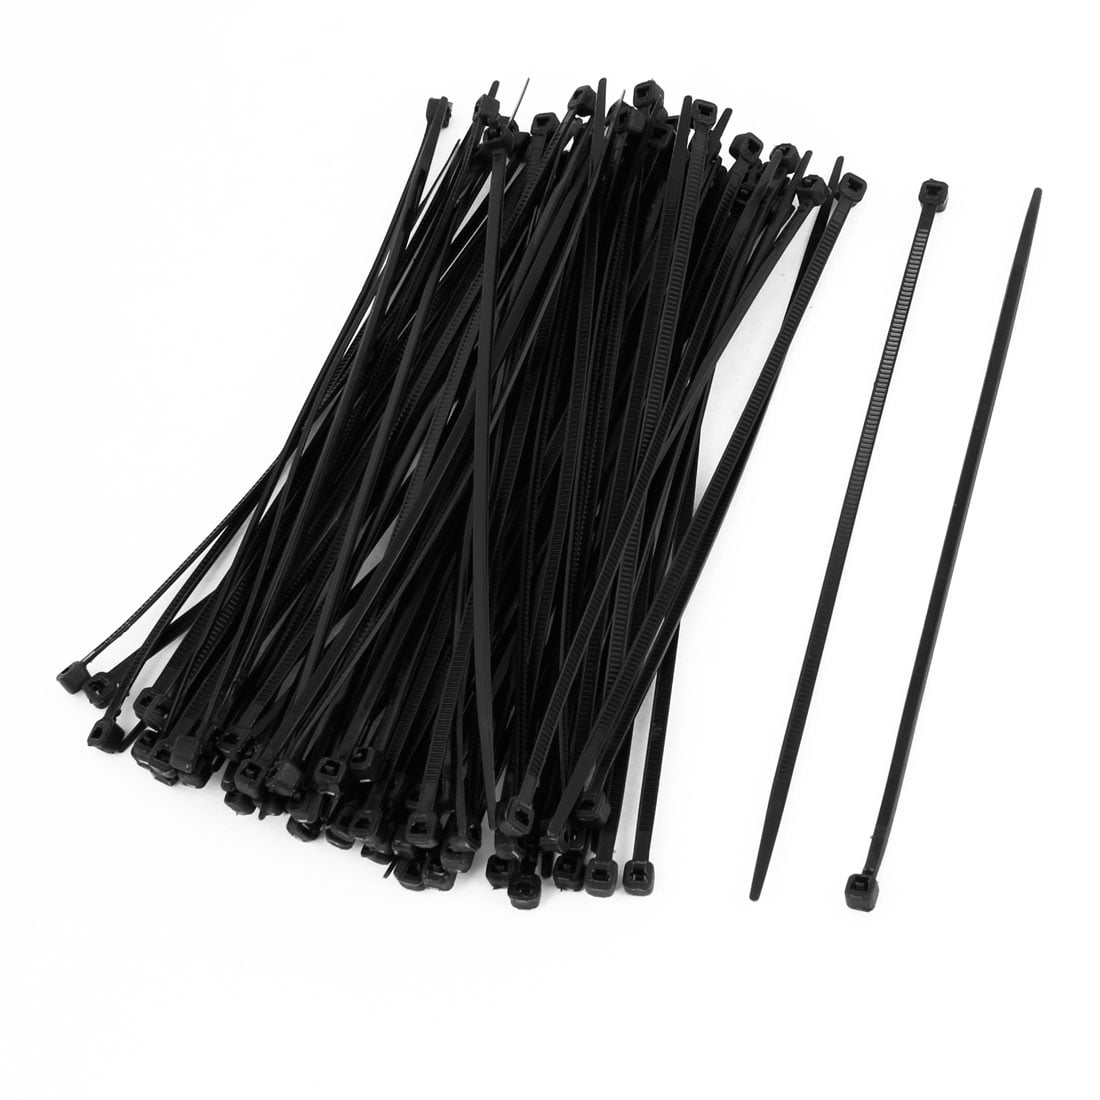 ZIP WRAPS LONG SHORT Thick Thin Narrow Small Fastener QUALITY BLACK CABLE TIES 